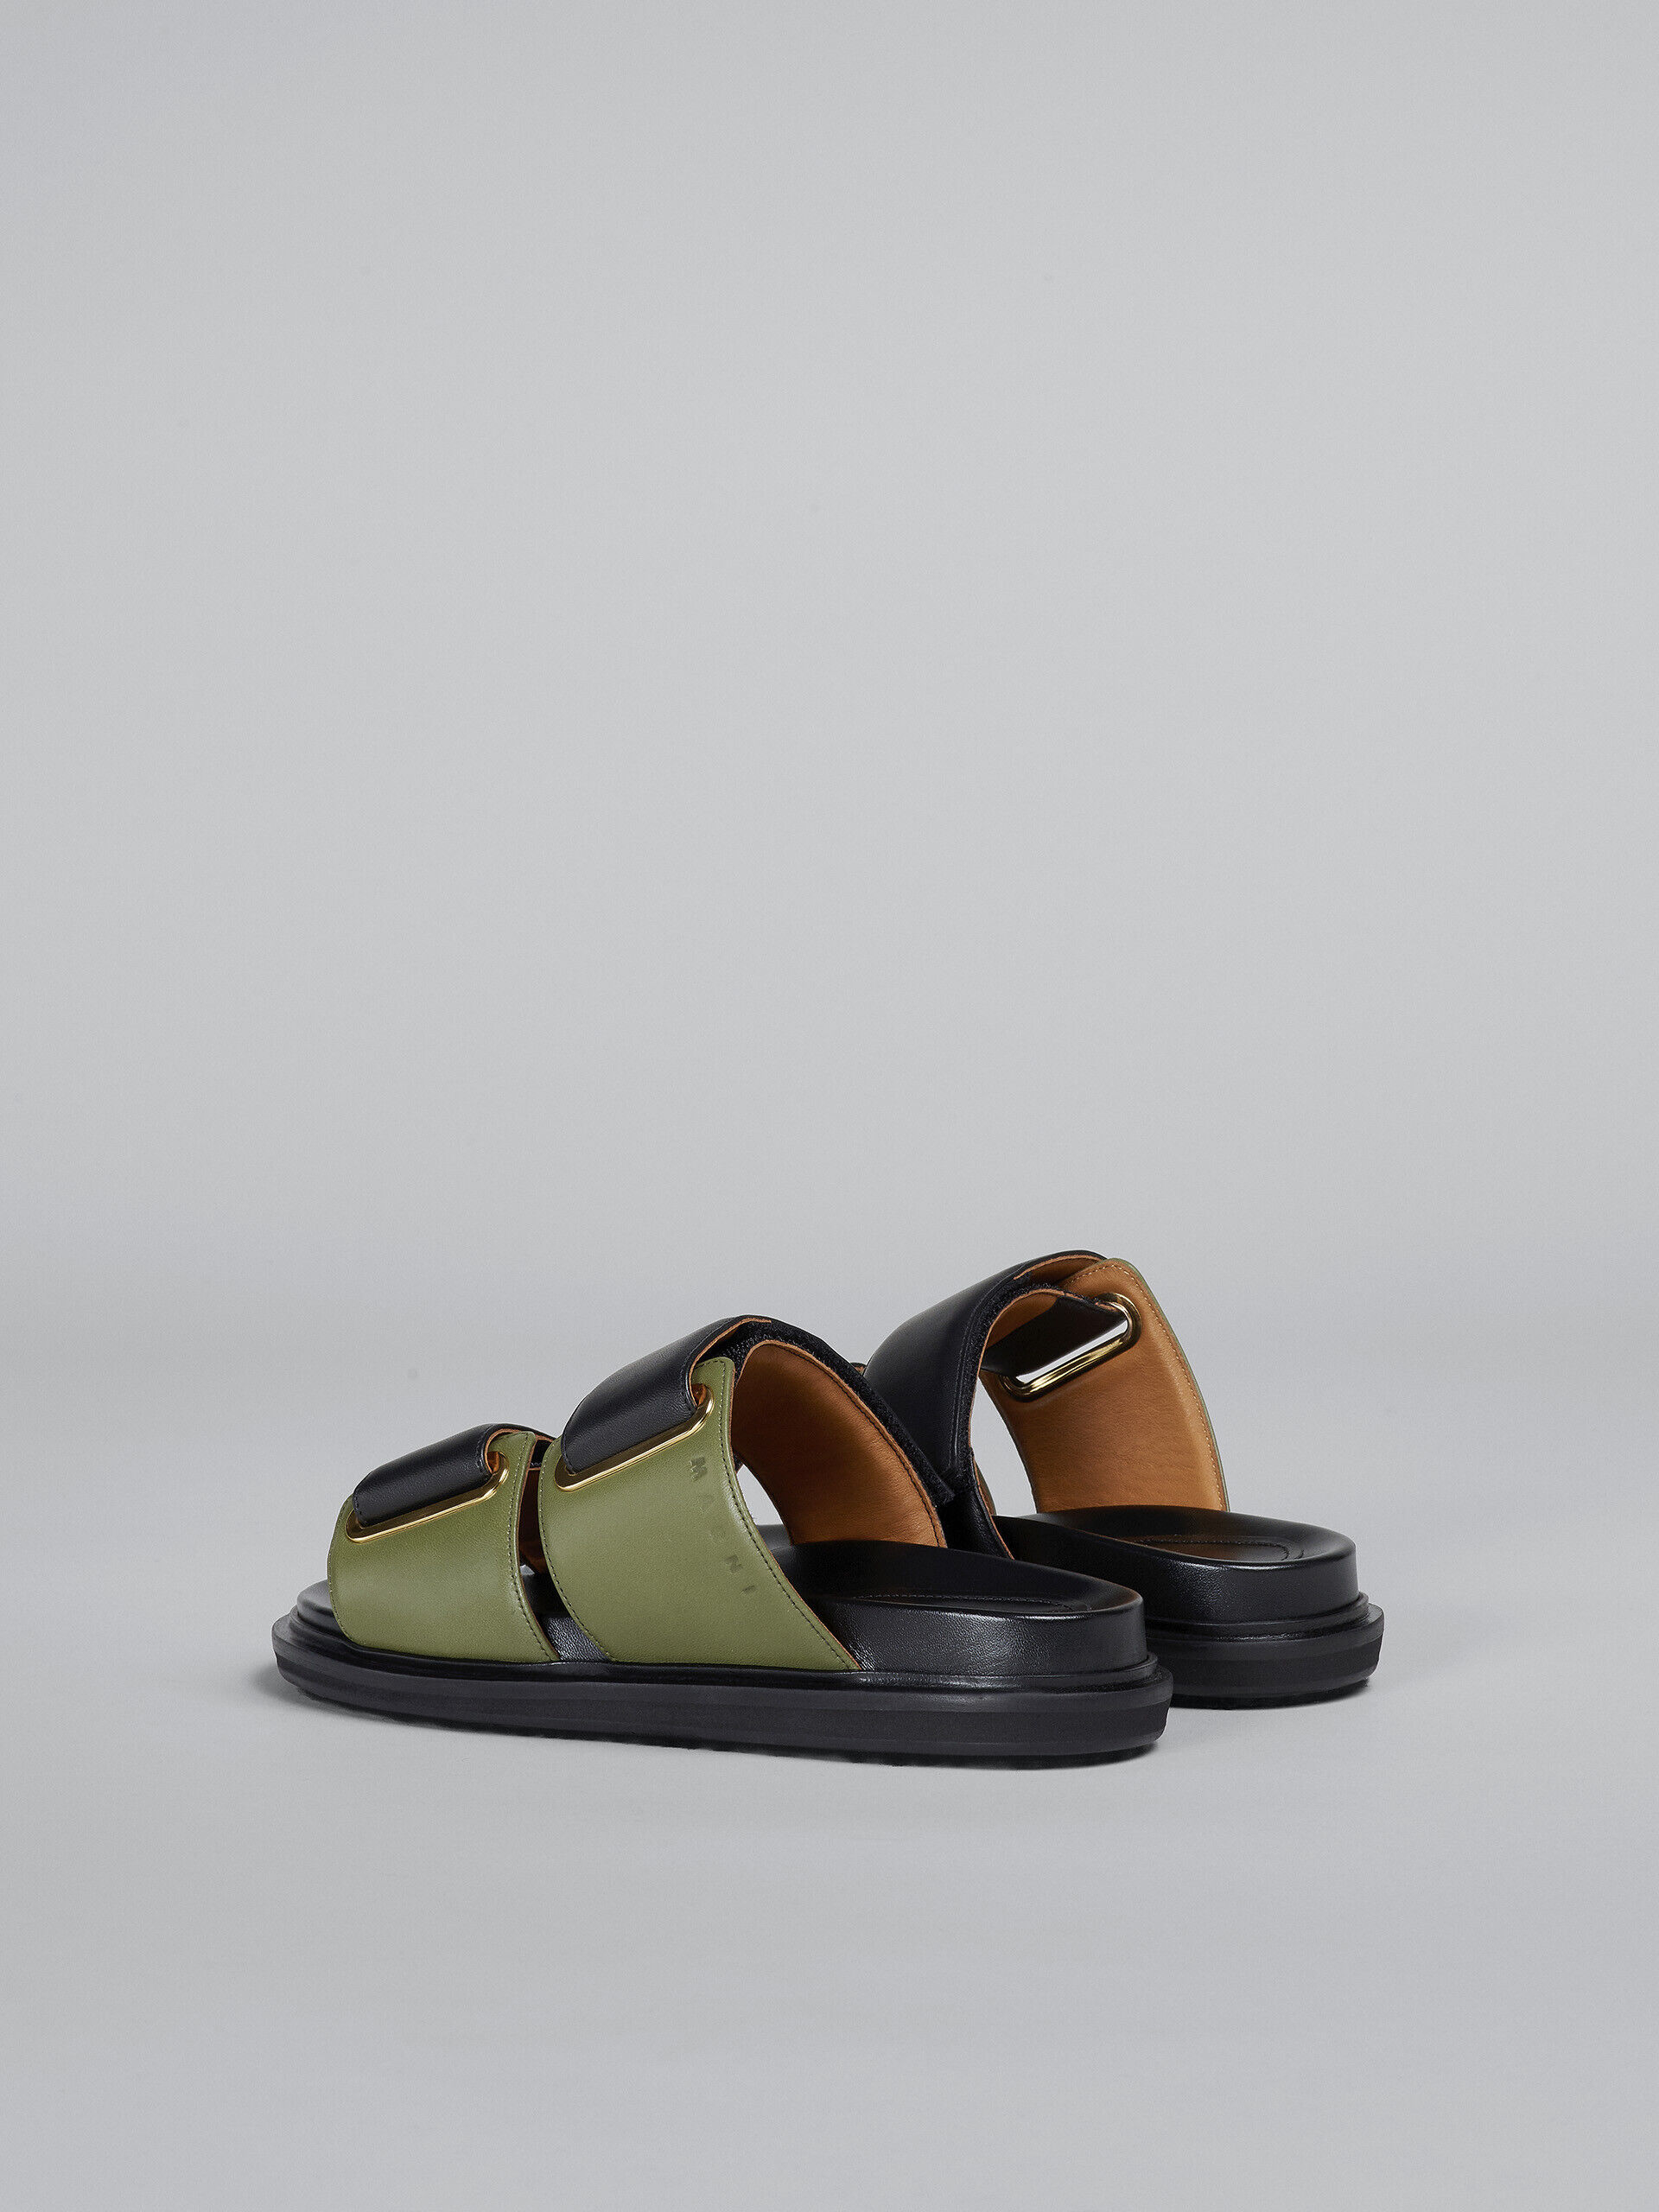 Black and green leather fussbett | Marni